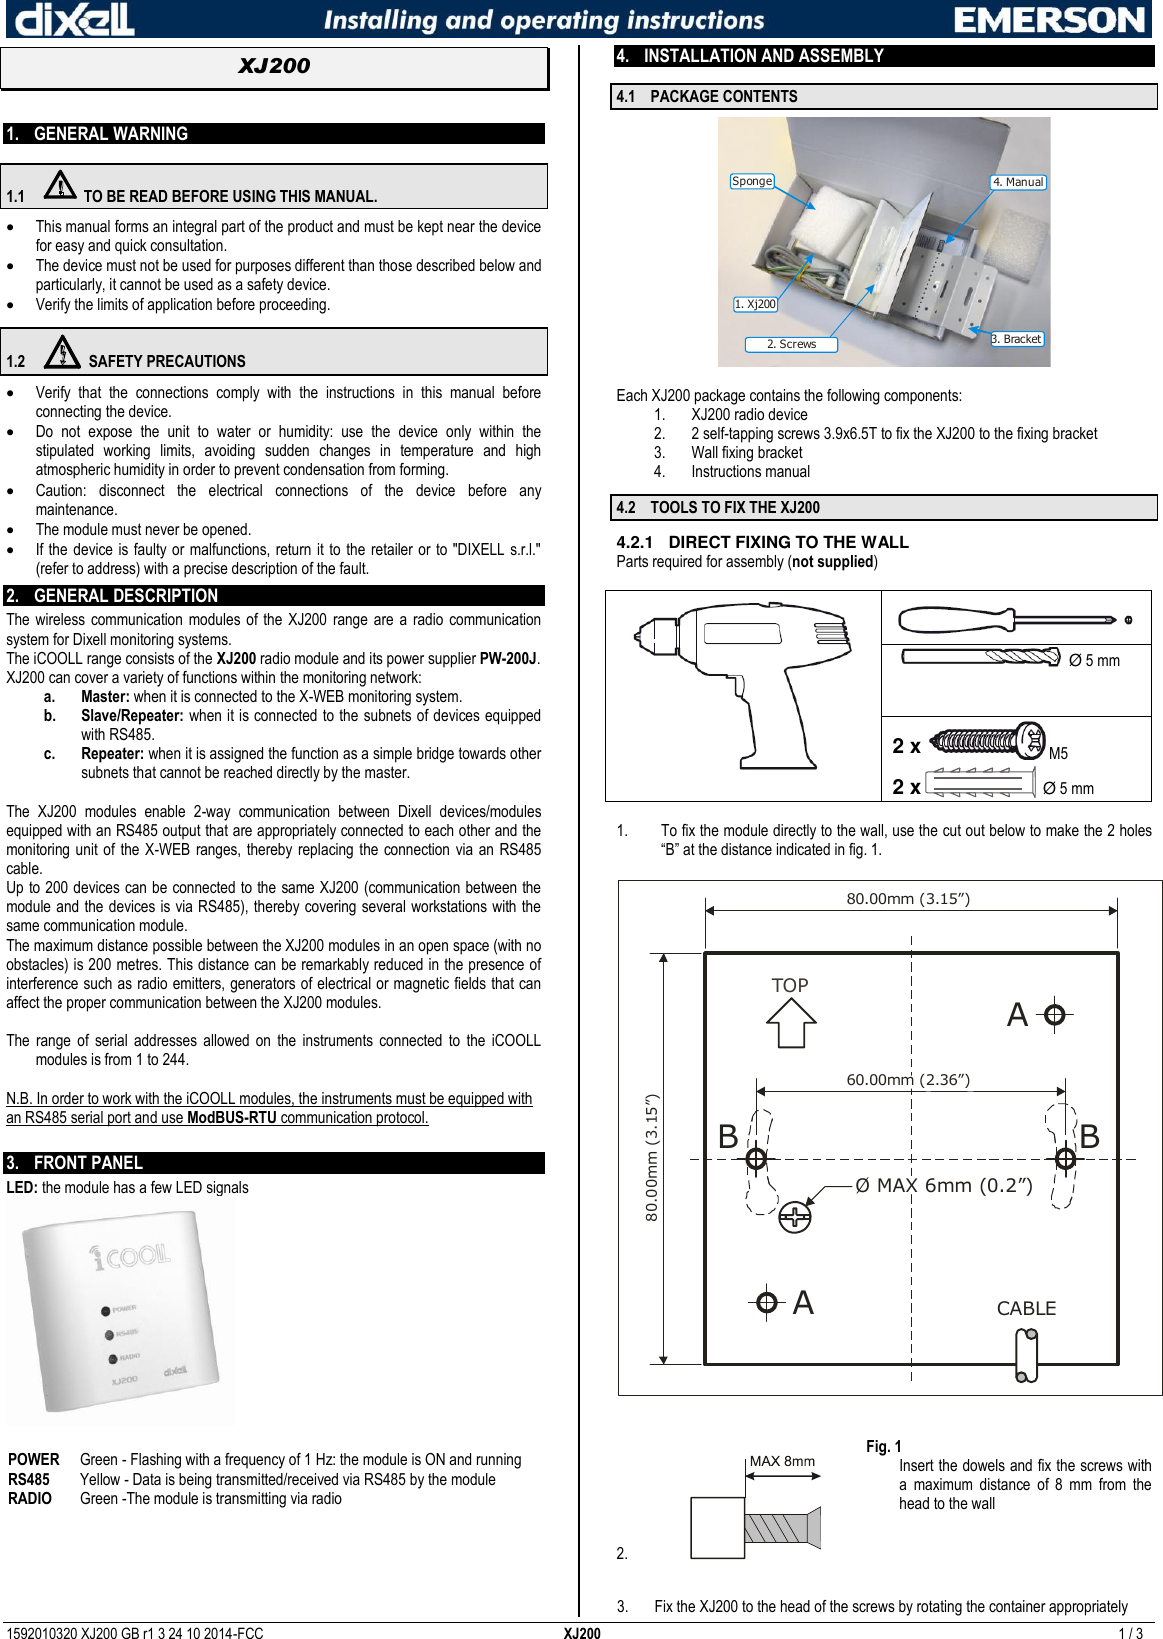  1592010320 XJ200 GB r1 3 24 10 2014-FCC  XJ200  1 / 3  XJ200   1. GENERAL WARNING 1.1  TO BE READ BEFORE USING THIS MANUAL.  This manual forms an integral part of the product and must be kept near the device for easy and quick consultation.  The device must not be used for purposes different than those described below and particularly, it cannot be used as a safety device.  Verify the limits of application before proceeding. 1.2  SAFETY PRECAUTIONS  Verify  that  the  connections  comply  with  the  instructions  in  this  manual  before connecting the device.  Do  not  expose  the  unit  to  water  or  humidity:  use  the  device  only  within  the stipulated  working  limits,  avoiding  sudden  changes  in  temperature  and  high atmospheric humidity in order to prevent condensation from forming.  Caution:  disconnect  the  electrical  connections  of  the  device  before  any maintenance.  The module must never be opened.   If the device is faulty or  malfunctions, return it to the retailer or to  &quot;DIXELL s.r.l.&quot; (refer to address) with a precise description of the fault. 2. GENERAL DESCRIPTION  The wireless communication modules  of the  XJ200  range  are  a  radio  communication system for Dixell monitoring systems.  The iCOOLL range consists of the XJ200 radio module and its power supplier PW-200J. XJ200 can cover a variety of functions within the monitoring network: a. Master: when it is connected to the X-WEB monitoring system. b. Slave/Repeater: when it is connected to the subnets of devices equipped with RS485. c. Repeater: when it is assigned the function as a simple bridge towards other subnets that cannot be reached directly by the master.  The  XJ200  modules  enable  2-way  communication  between  Dixell  devices/modules equipped with an RS485 output that are appropriately connected to each other and the monitoring unit of  the X-WEB  ranges, thereby  replacing the  connection via  an  RS485 cable.  Up to 200 devices can be connected to the same XJ200 (communication between the module and the devices is via RS485), thereby covering several workstations with the same communication module.  The maximum distance possible between the XJ200 modules in an open space (with no obstacles) is 200 metres. This distance can be remarkably reduced in the presence of interference such as radio emitters, generators of electrical or magnetic fields that can affect the proper communication between the XJ200 modules.  The  range  of  serial  addresses  allowed  on  the  instruments  connected  to  the  iCOOLL modules is from 1 to 244.  N.B. In order to work with the iCOOLL modules, the instruments must be equipped with an RS485 serial port and use ModBUS-RTU communication protocol.  3. FRONT PANEL  LED: the module has a few LED signals   POWER  Green - Flashing with a frequency of 1 Hz: the module is ON and running RS485  Yellow - Data is being transmitted/received via RS485 by the module RADIO Green -The module is transmitting via radio   4. INSTALLATION AND ASSEMBLY  4.1 PACKAGE CONTENTS 3. Bracket4. Manual1. Xj200Sponge2. Screws  Each XJ200 package contains the following components: 1. XJ200 radio device 2. 2 self-tapping screws 3.9x6.5T to fix the XJ200 to the fixing bracket 3. Wall fixing bracket 4. Instructions manual 4.2 TOOLS TO FIX THE XJ200 4.2.1  DIRECT FIXING TO THE WALL Parts required for assembly (not supplied)     Ø 5 mm  2 x M5 2 x   Ø 5 mm  1. To fix the module directly to the wall, use the cut out below to make the 2 holes “B” at the distance indicated in fig. 1.  TOPØ MAX 6mm (0.2”)80.00mm (3.15”)80.00mm (3.15”)60.00mm (2.36”)CABLEAAB B  Fig. 1 2.   Insert the dowels and fix the screws with a  maximum  distance  of  8  mm  from  the head to the wall  3. Fix the XJ200 to the head of the screws by rotating the container appropriately  